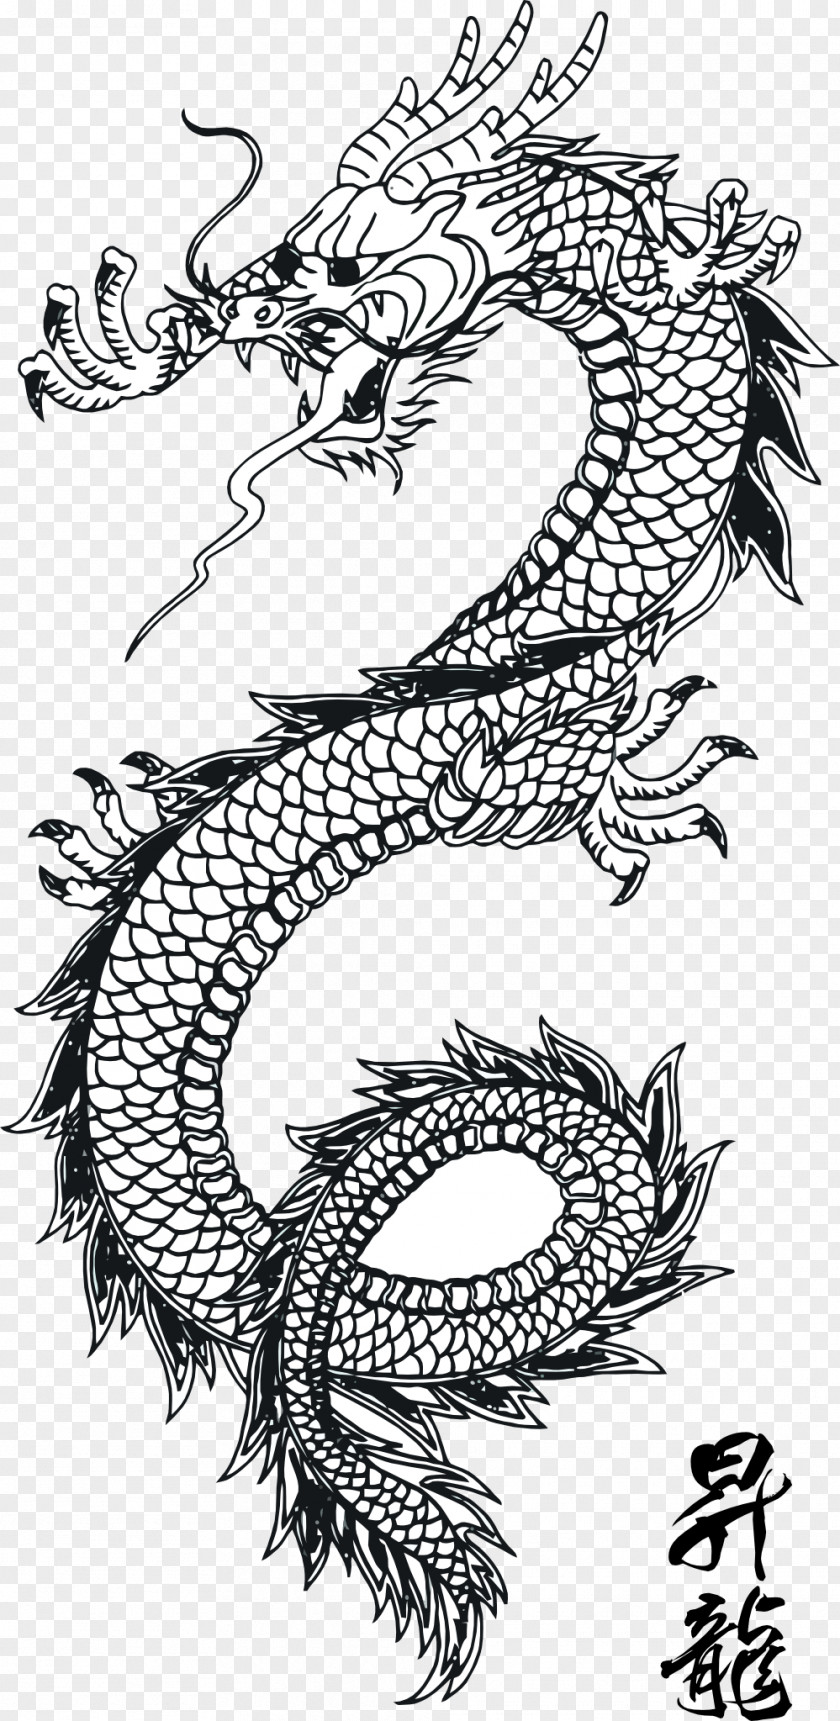 Dragon PNG clipart PNG